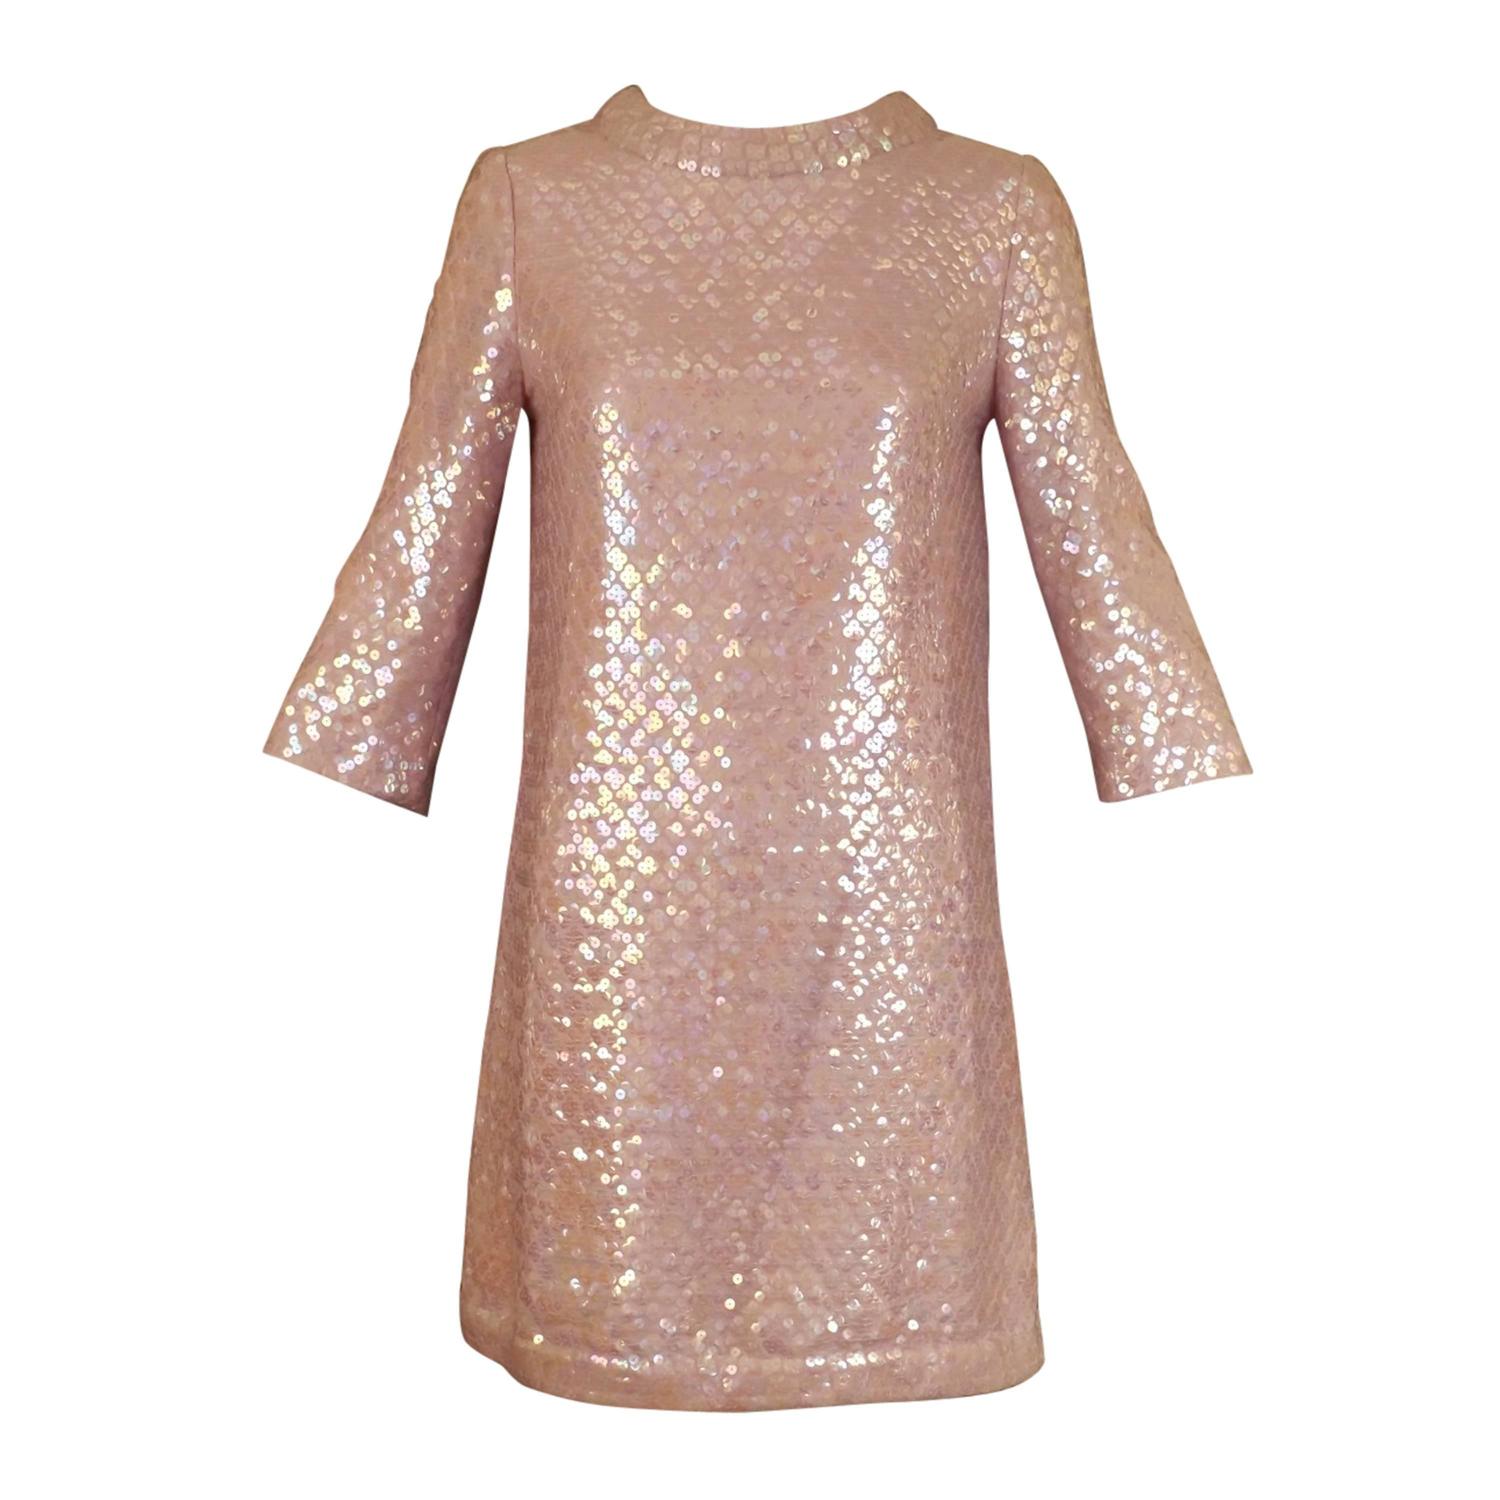 1960s Lilac Sequin Pierre Cardin A-line Dress at 1stdibs